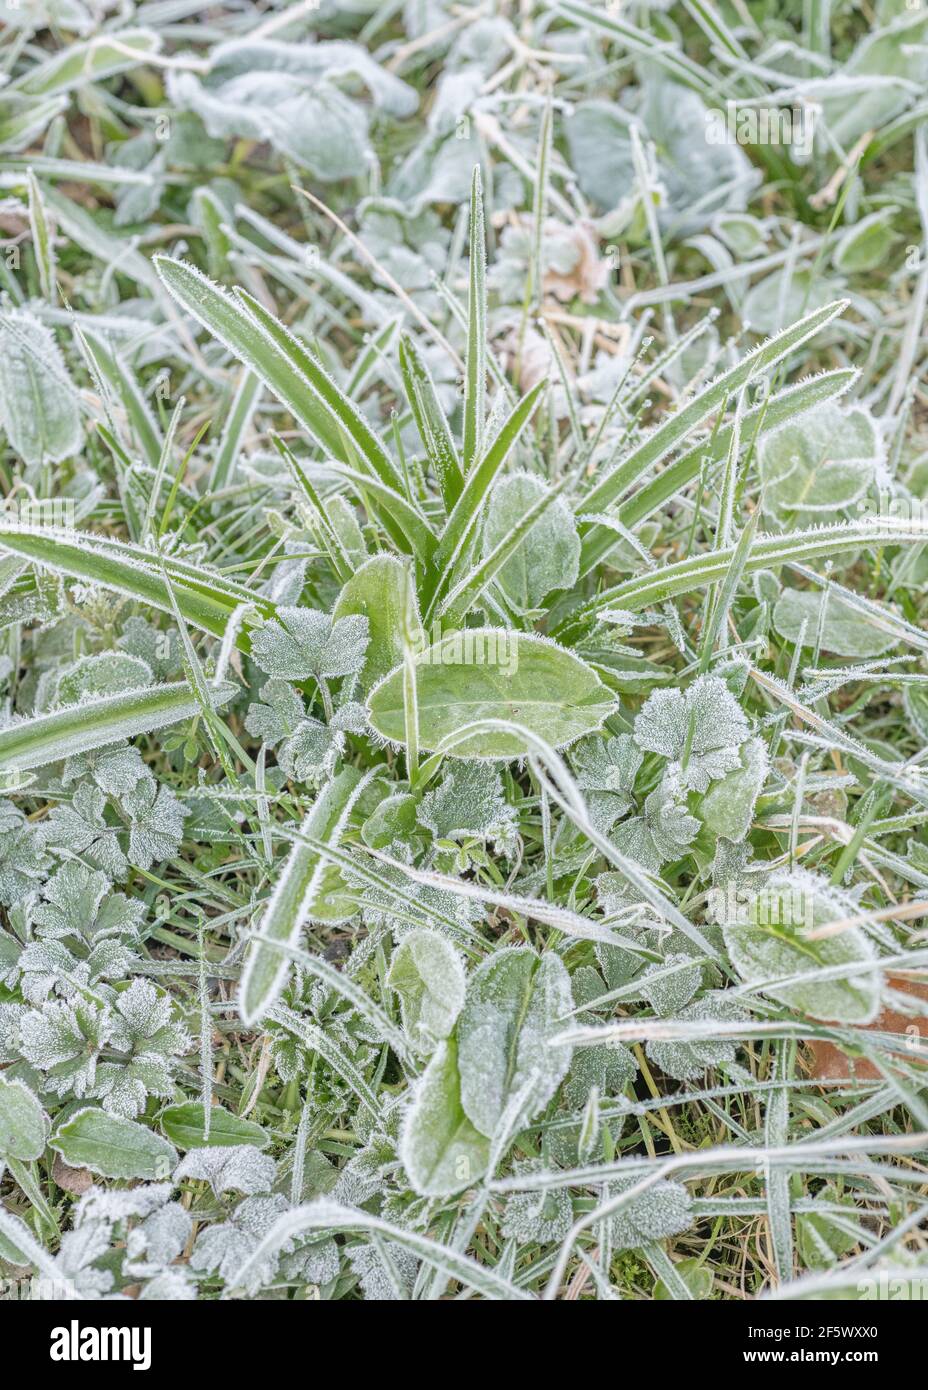 Heavy frost on leaf surface of early Common Sorrel / Rumex acetosa, Bluebell and grass leaves. For winter weather, UK cold snap, frozen plants. Stock Photo